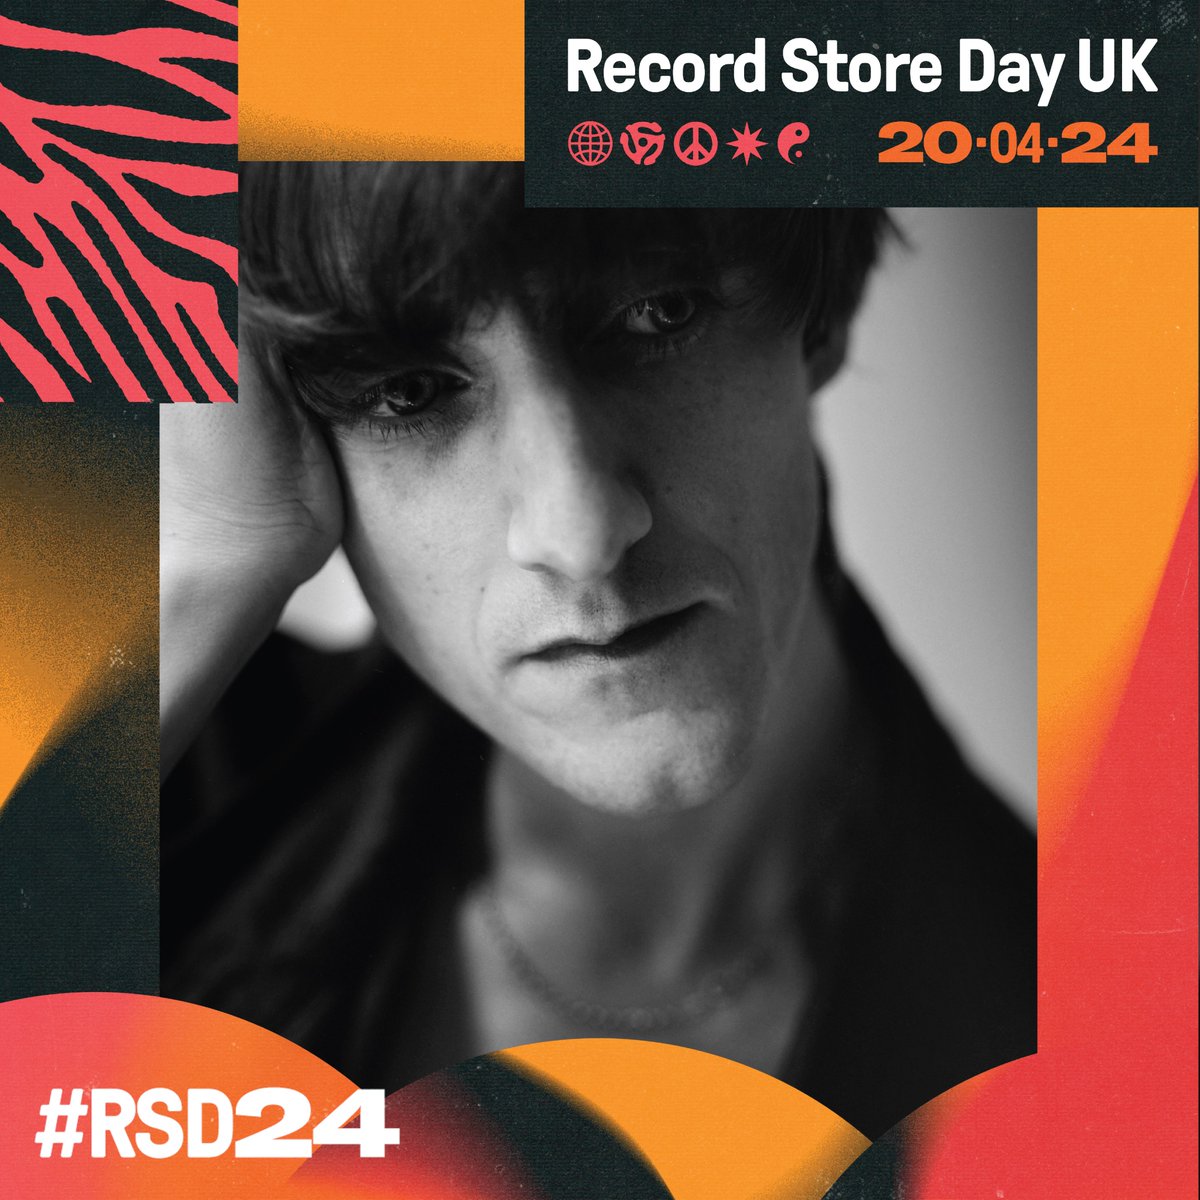 On Saturday 20th April, and exclusively for @RSDUK 2024, @london_records will release 'Vini Reilly' on limited and numbered black vinyl ⚫️ Find your participating local record store here recordstoreday.co.uk. #RSD24 #RecordStoreDay #ViniReilly